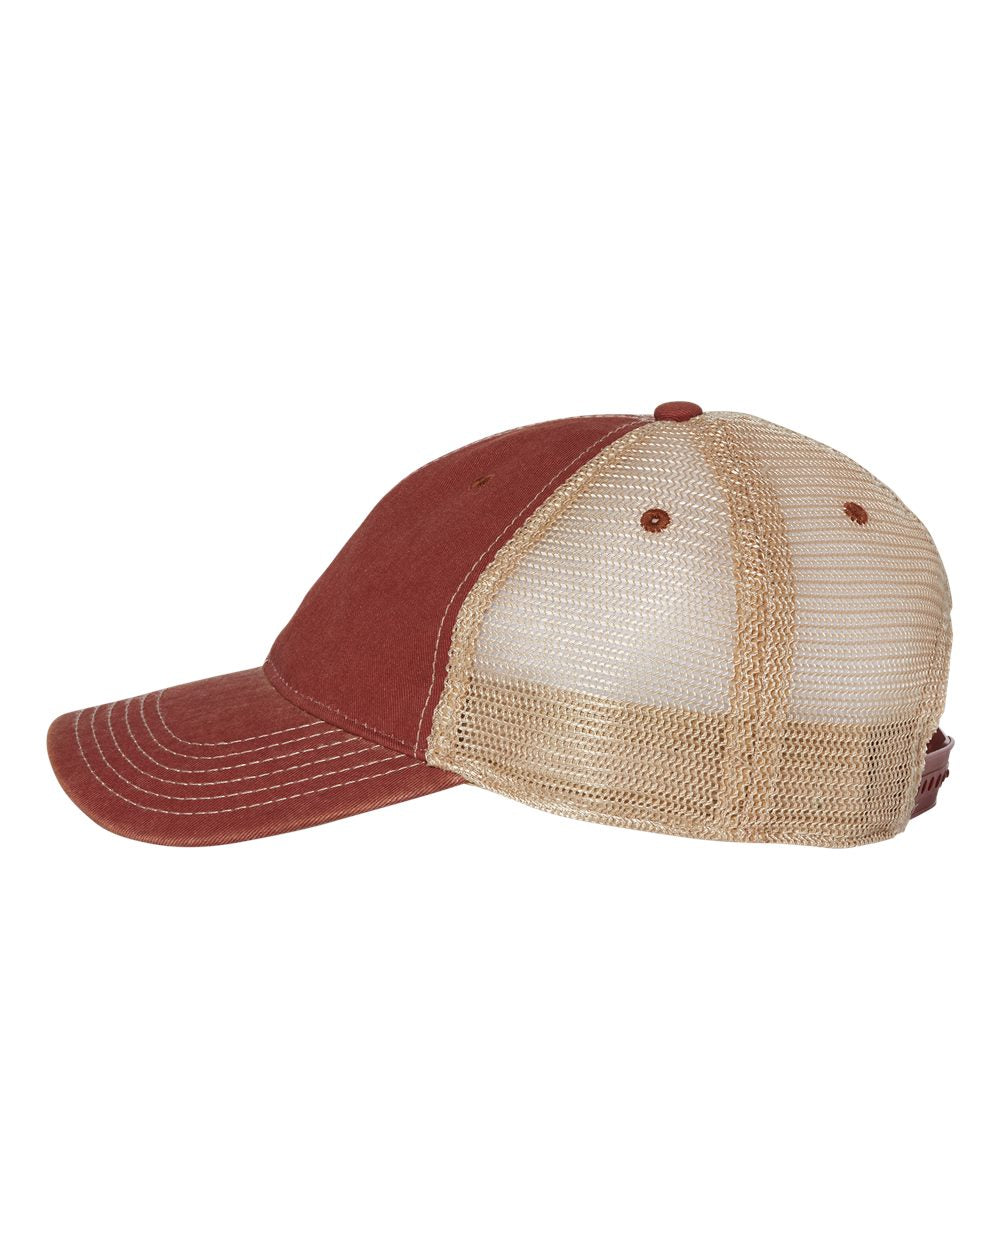 Side view of LEGACY OFA custom hat in cardinal and khaki